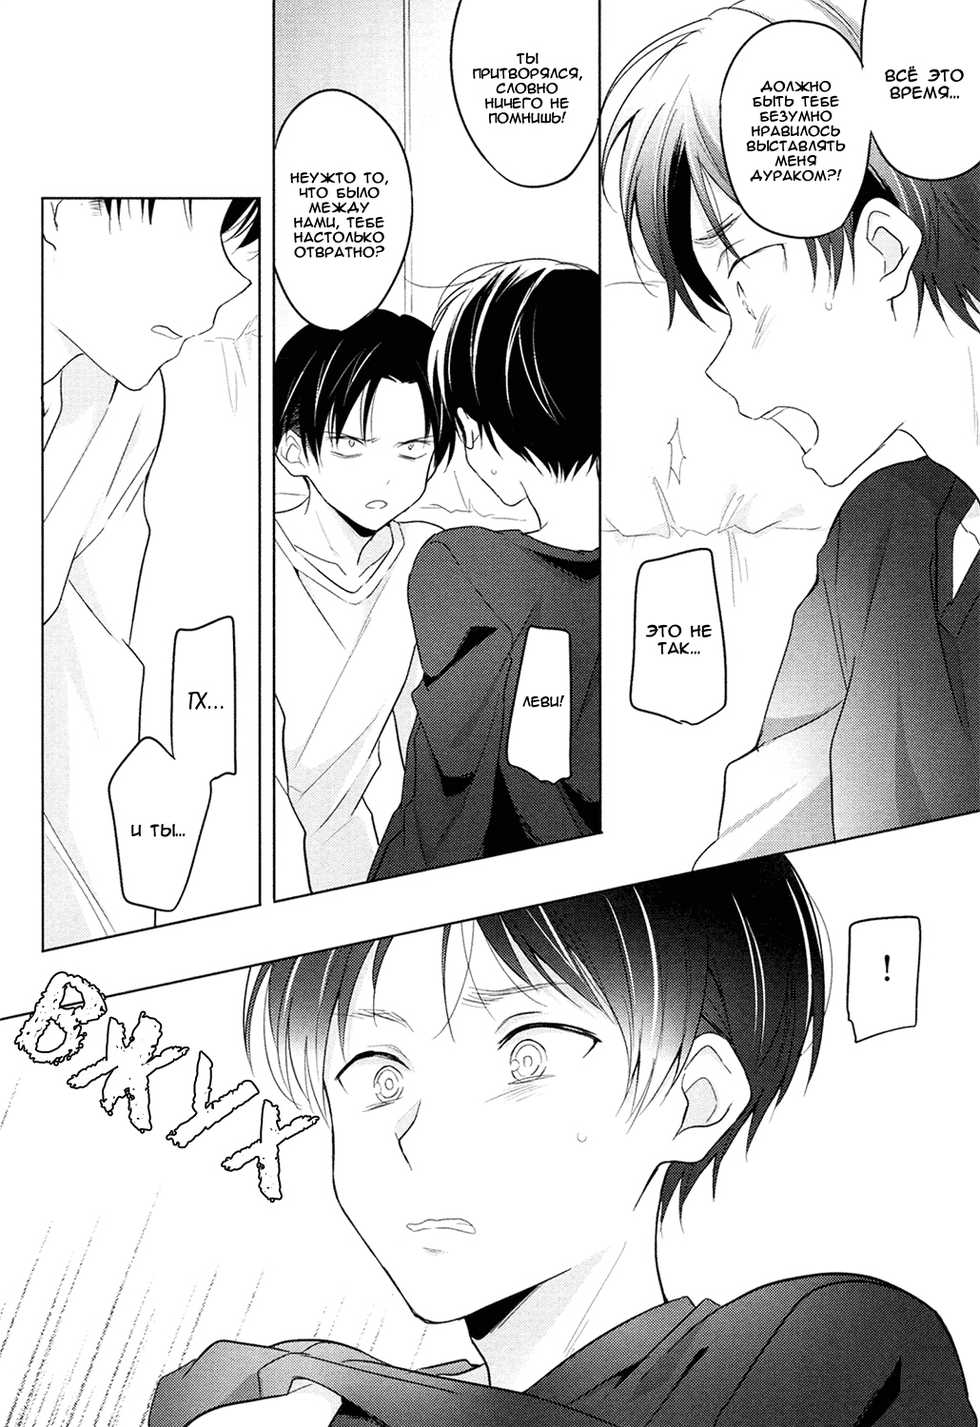 [hey you! (Non)] The time left for playing lovers -374 minutes- #2 + Extra (Shingeki no Kyojin) [Russian] - Page 8